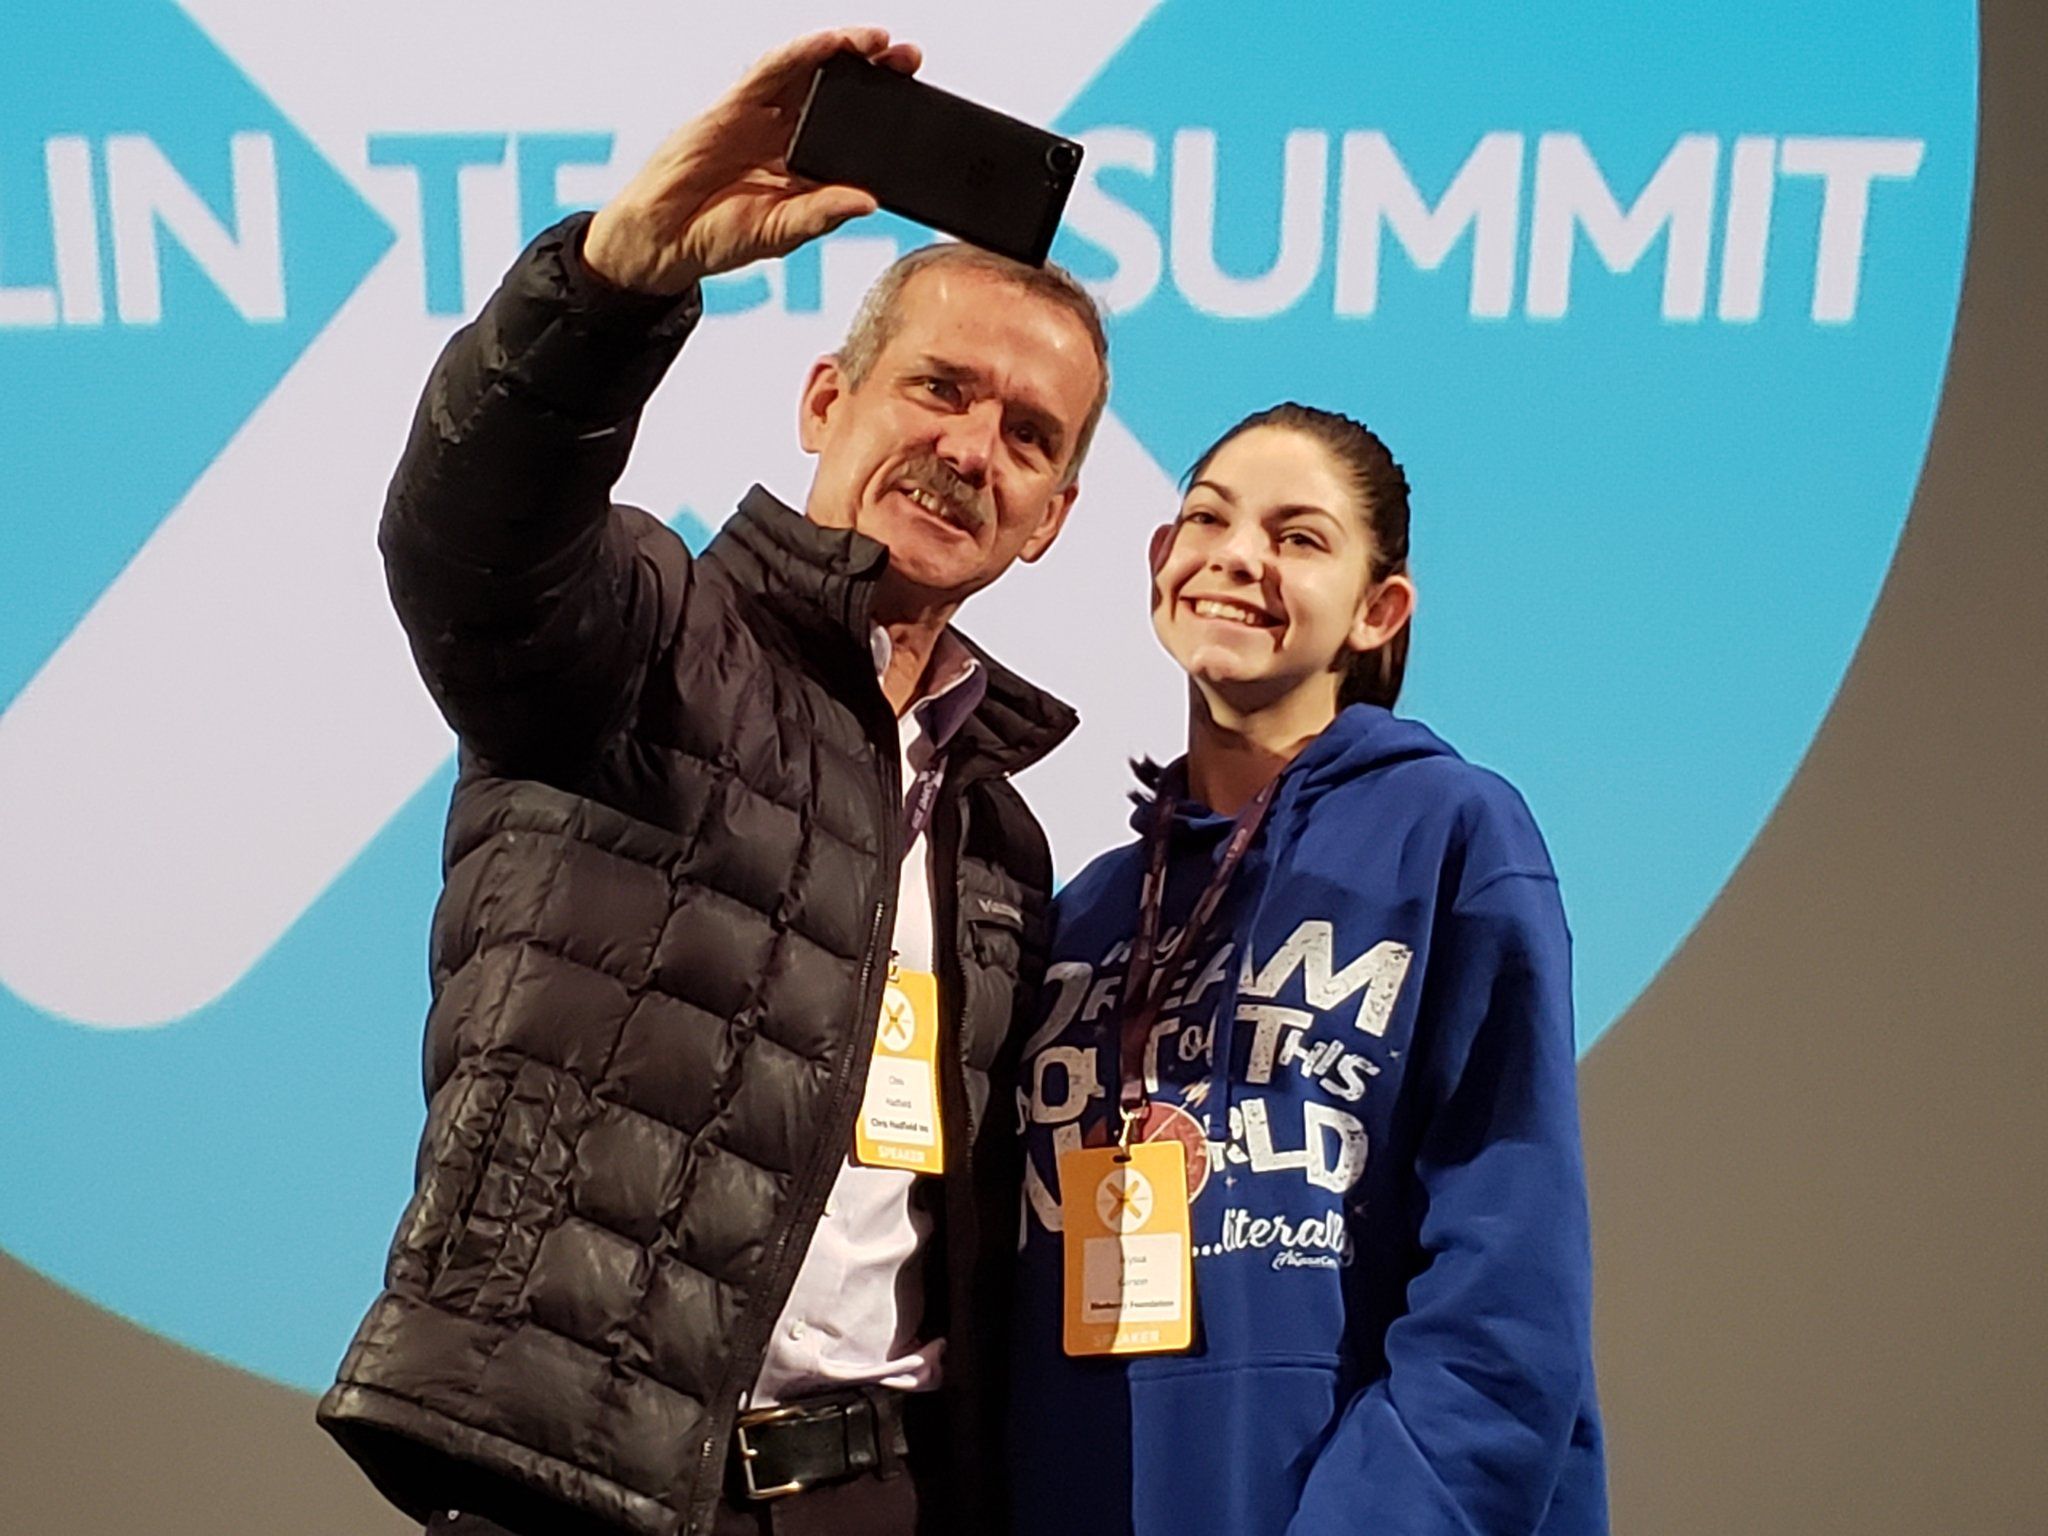 Alyssa Carson best days feature selfies with an astronaut especially Chris Hadfield #dts19